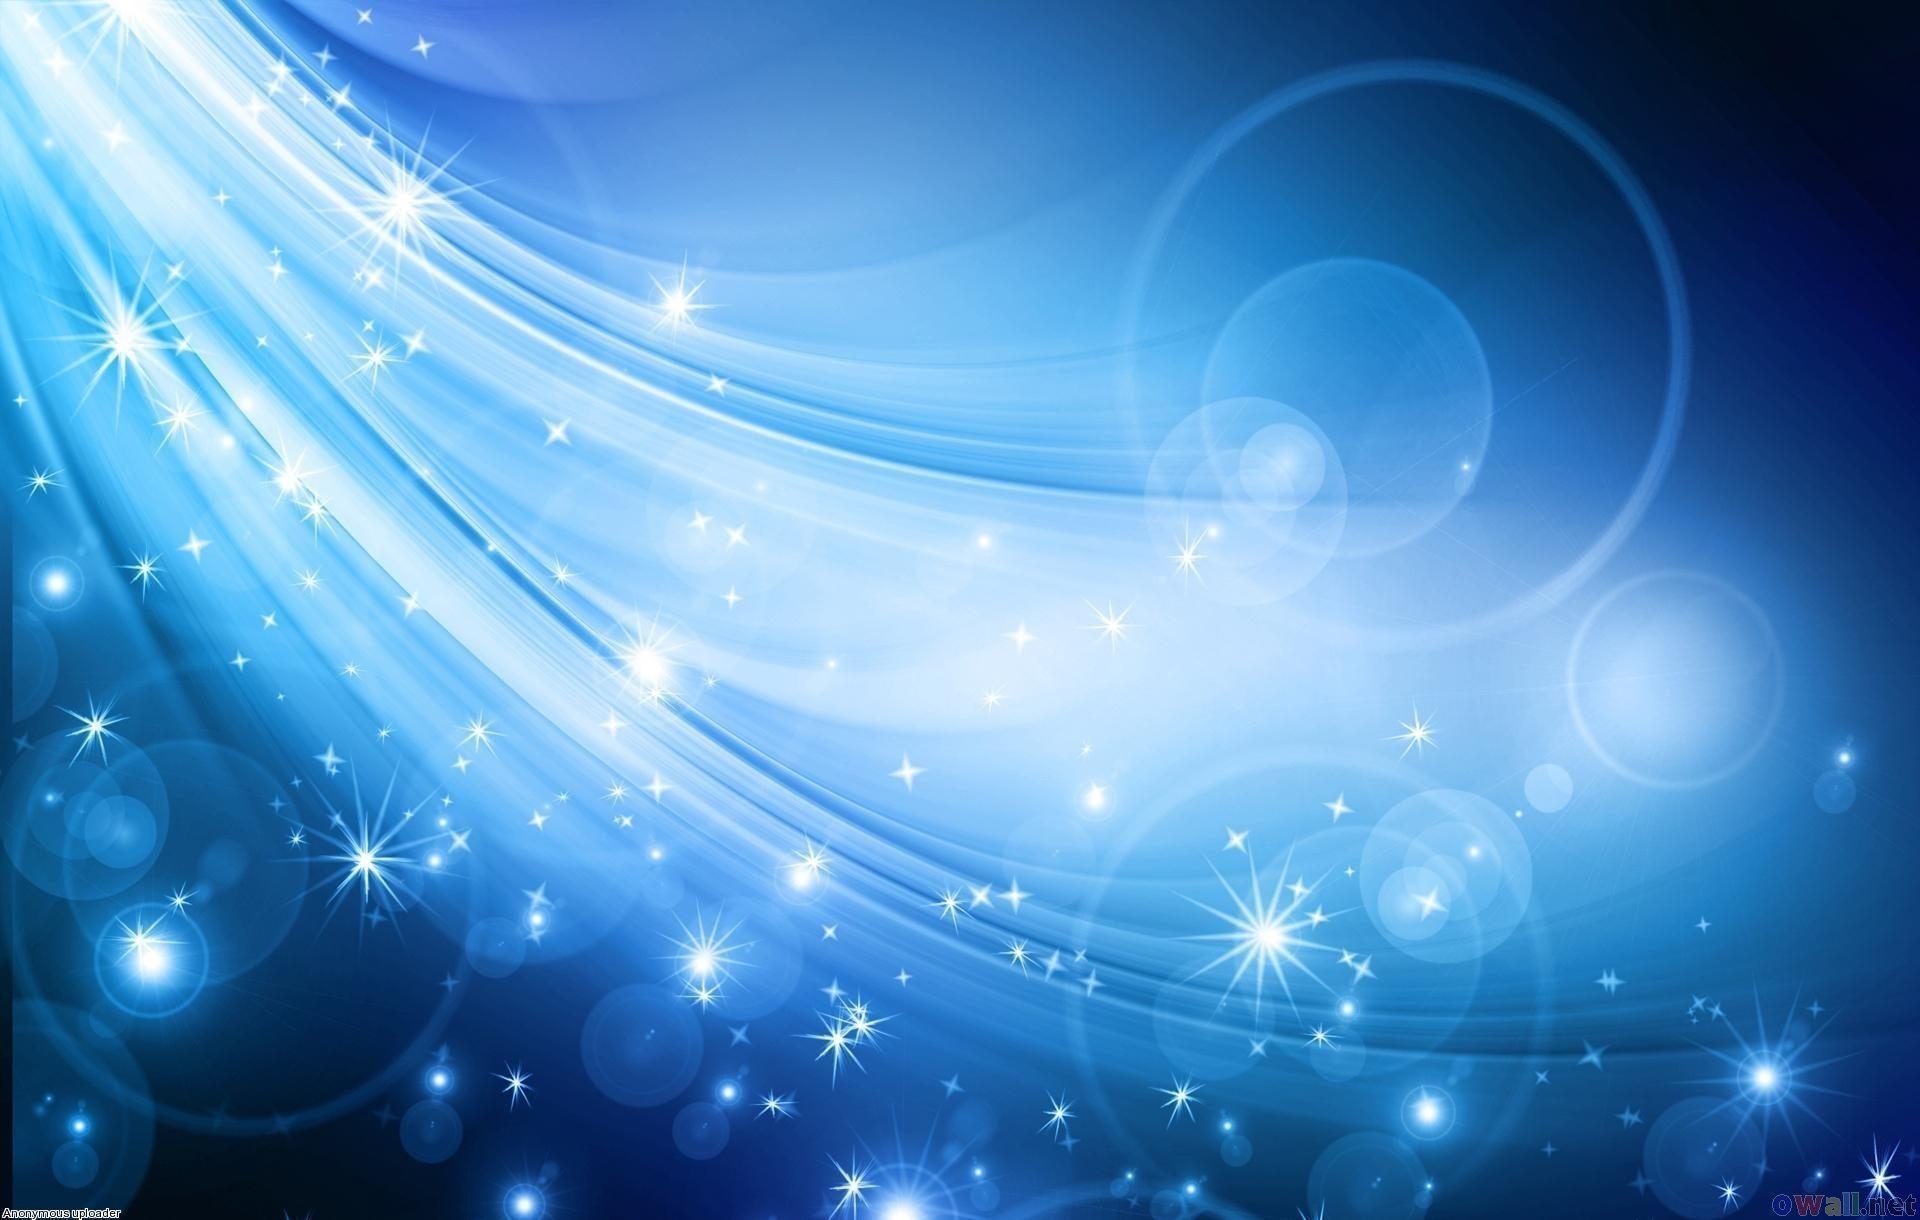 Wallpaper For > Sparkly Royal Blue Background